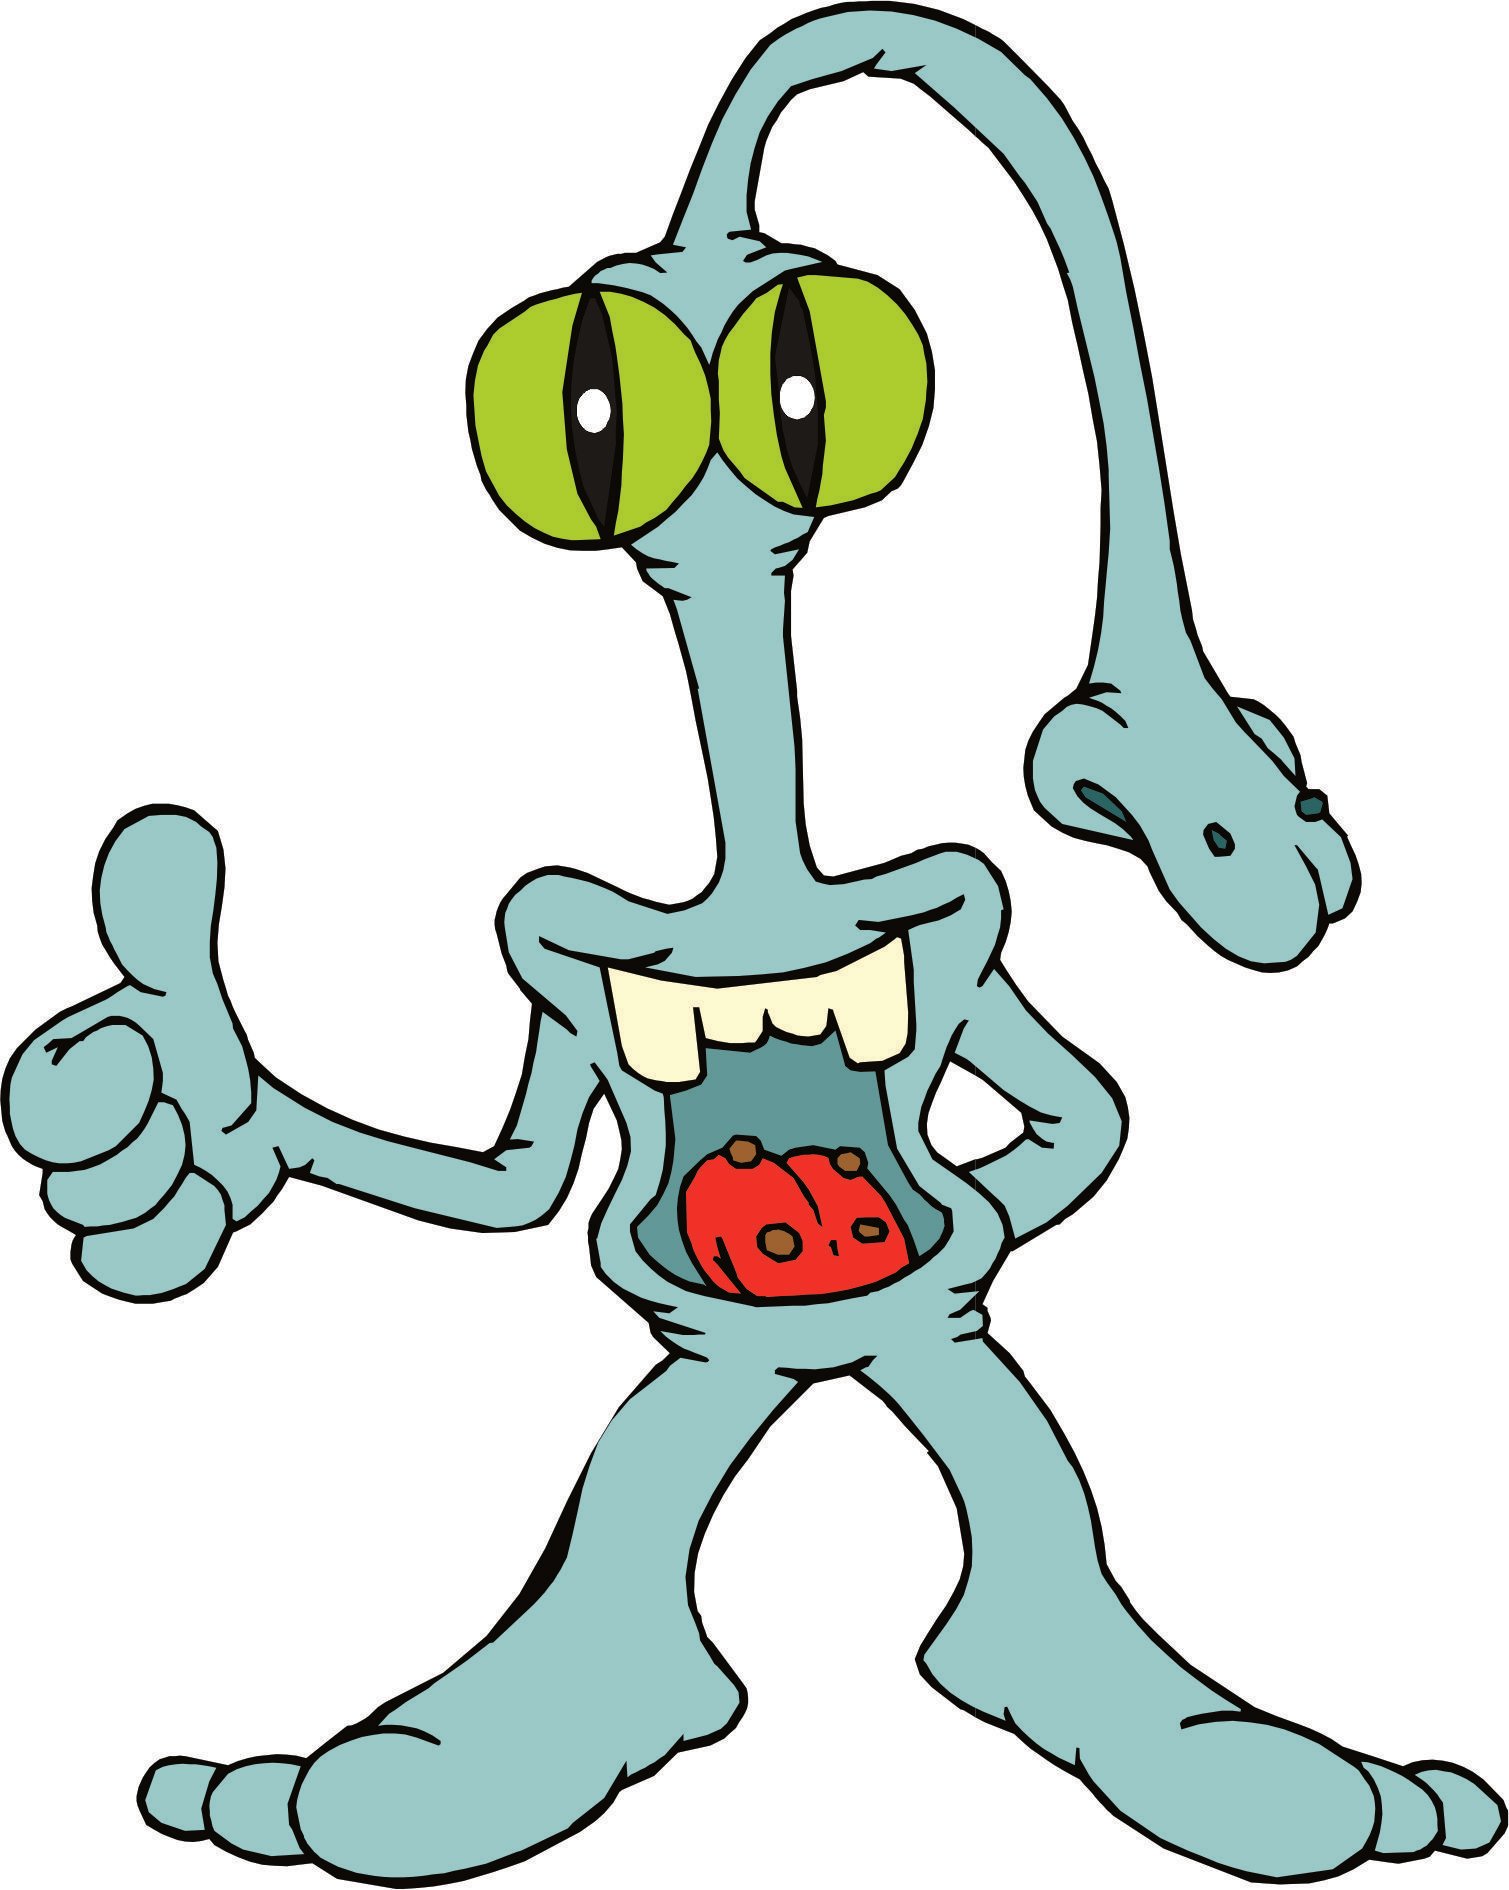 Free Cartoon Picture Of Aliens, Download Free Clip Art, Free Clip Art on Clipart Library